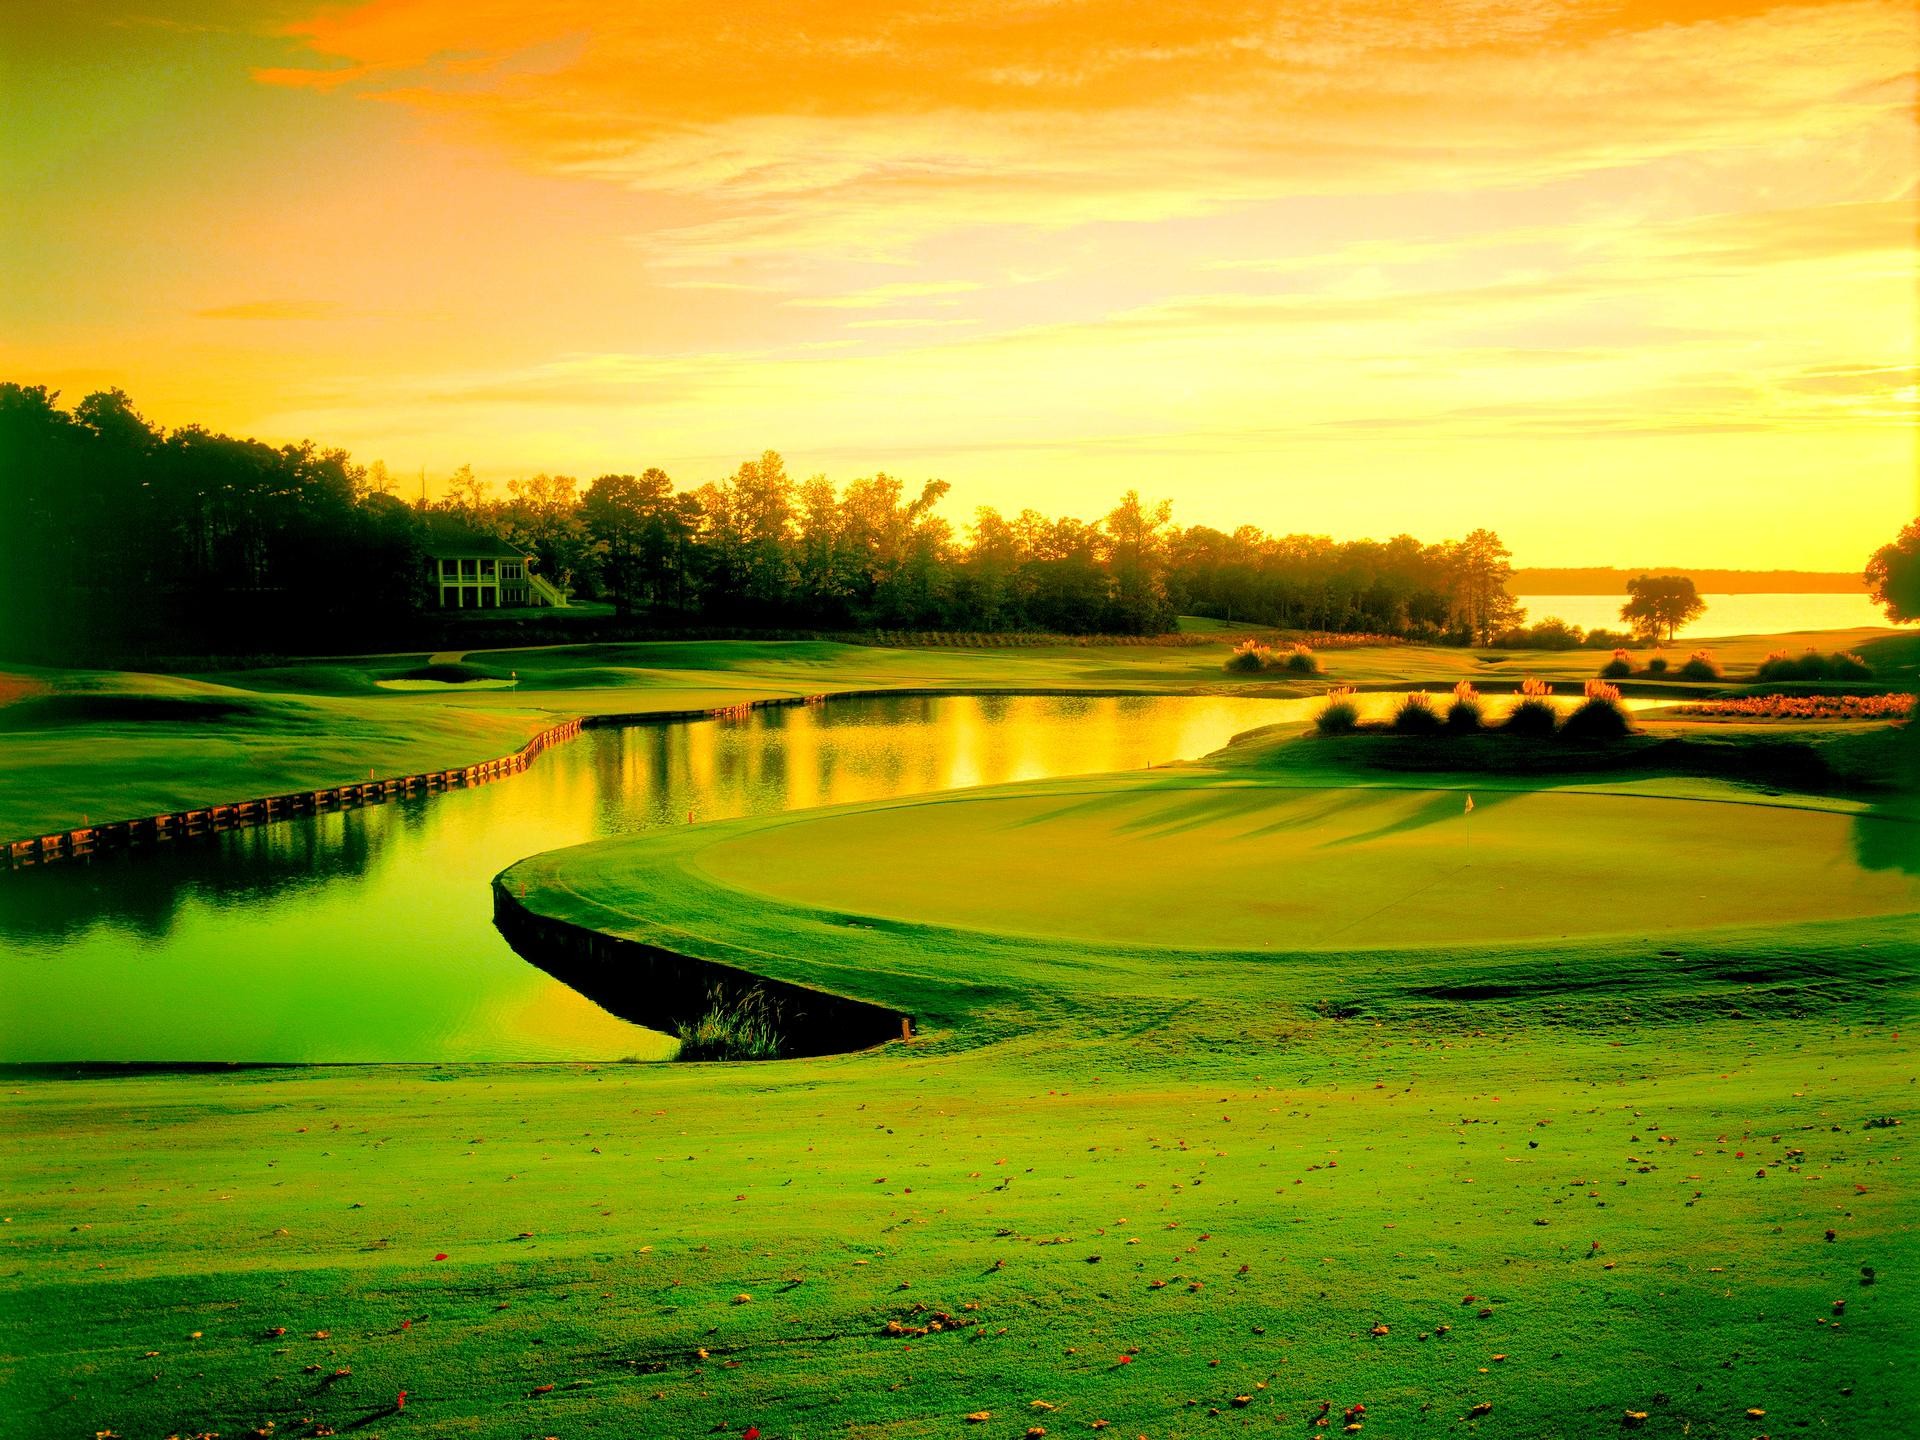 1920x1440 Golf course - (#156278) - High Quality and Resolution Wallpapers on .